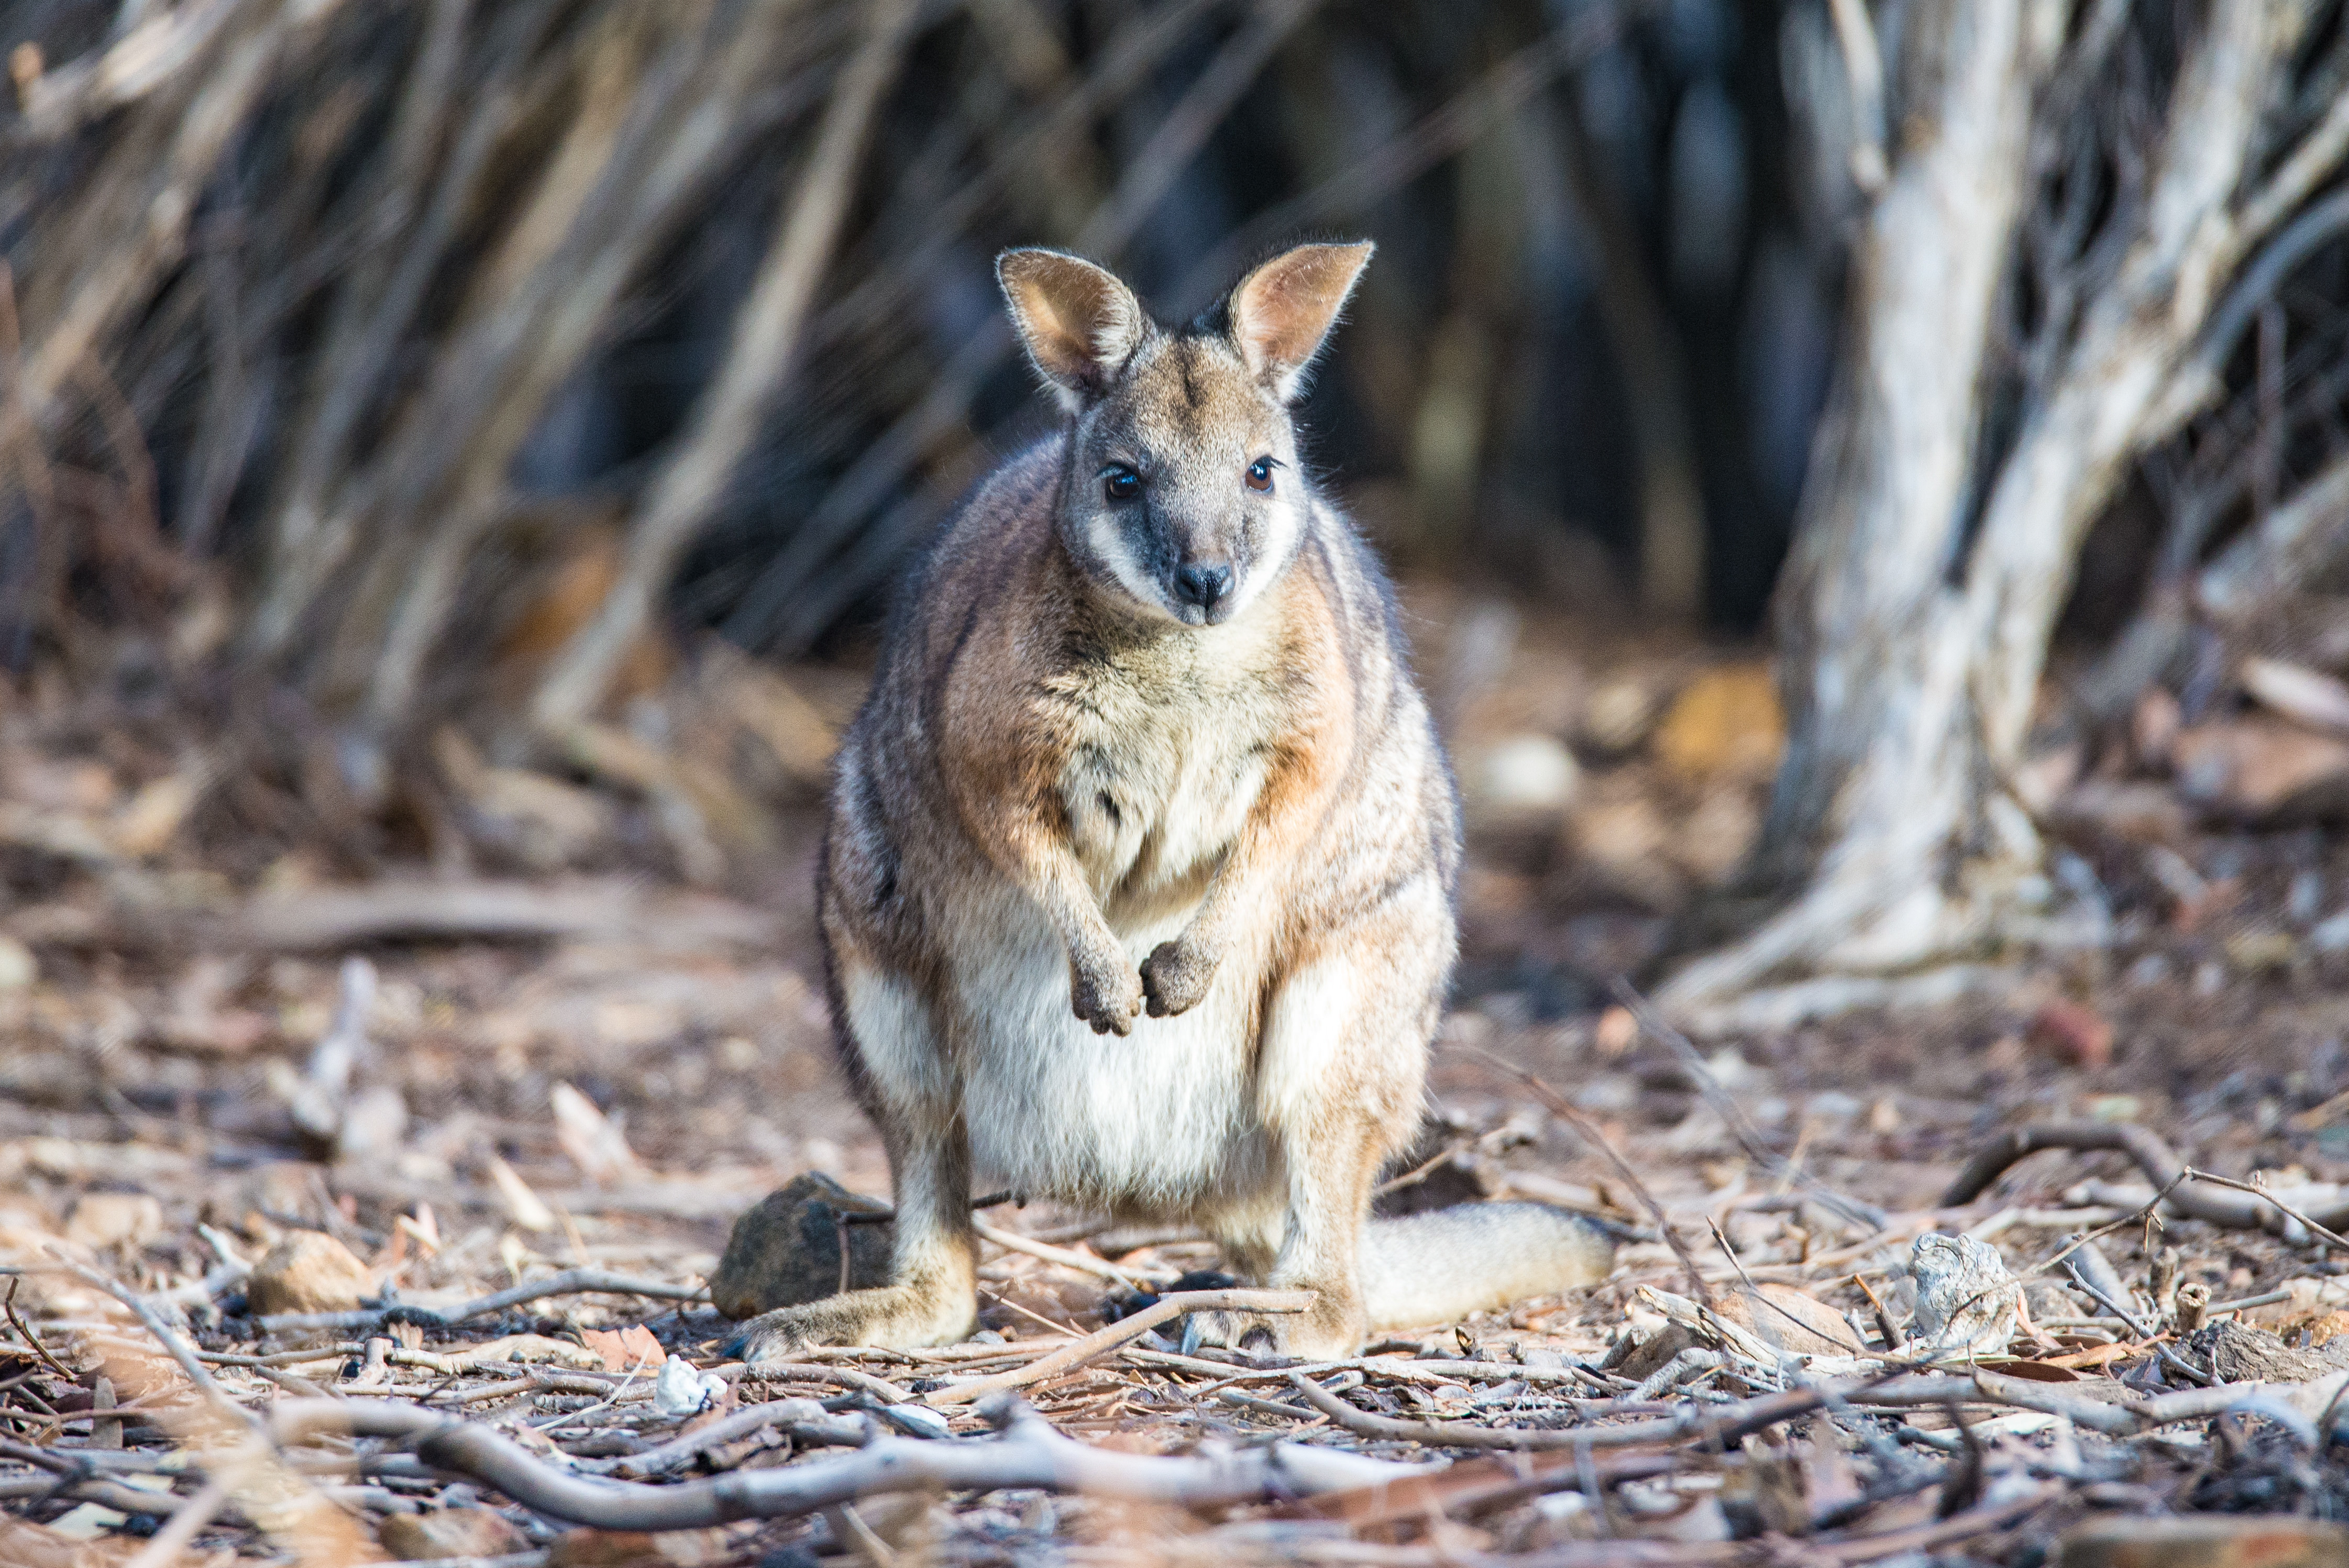 Experience Australia's wilderness with your family